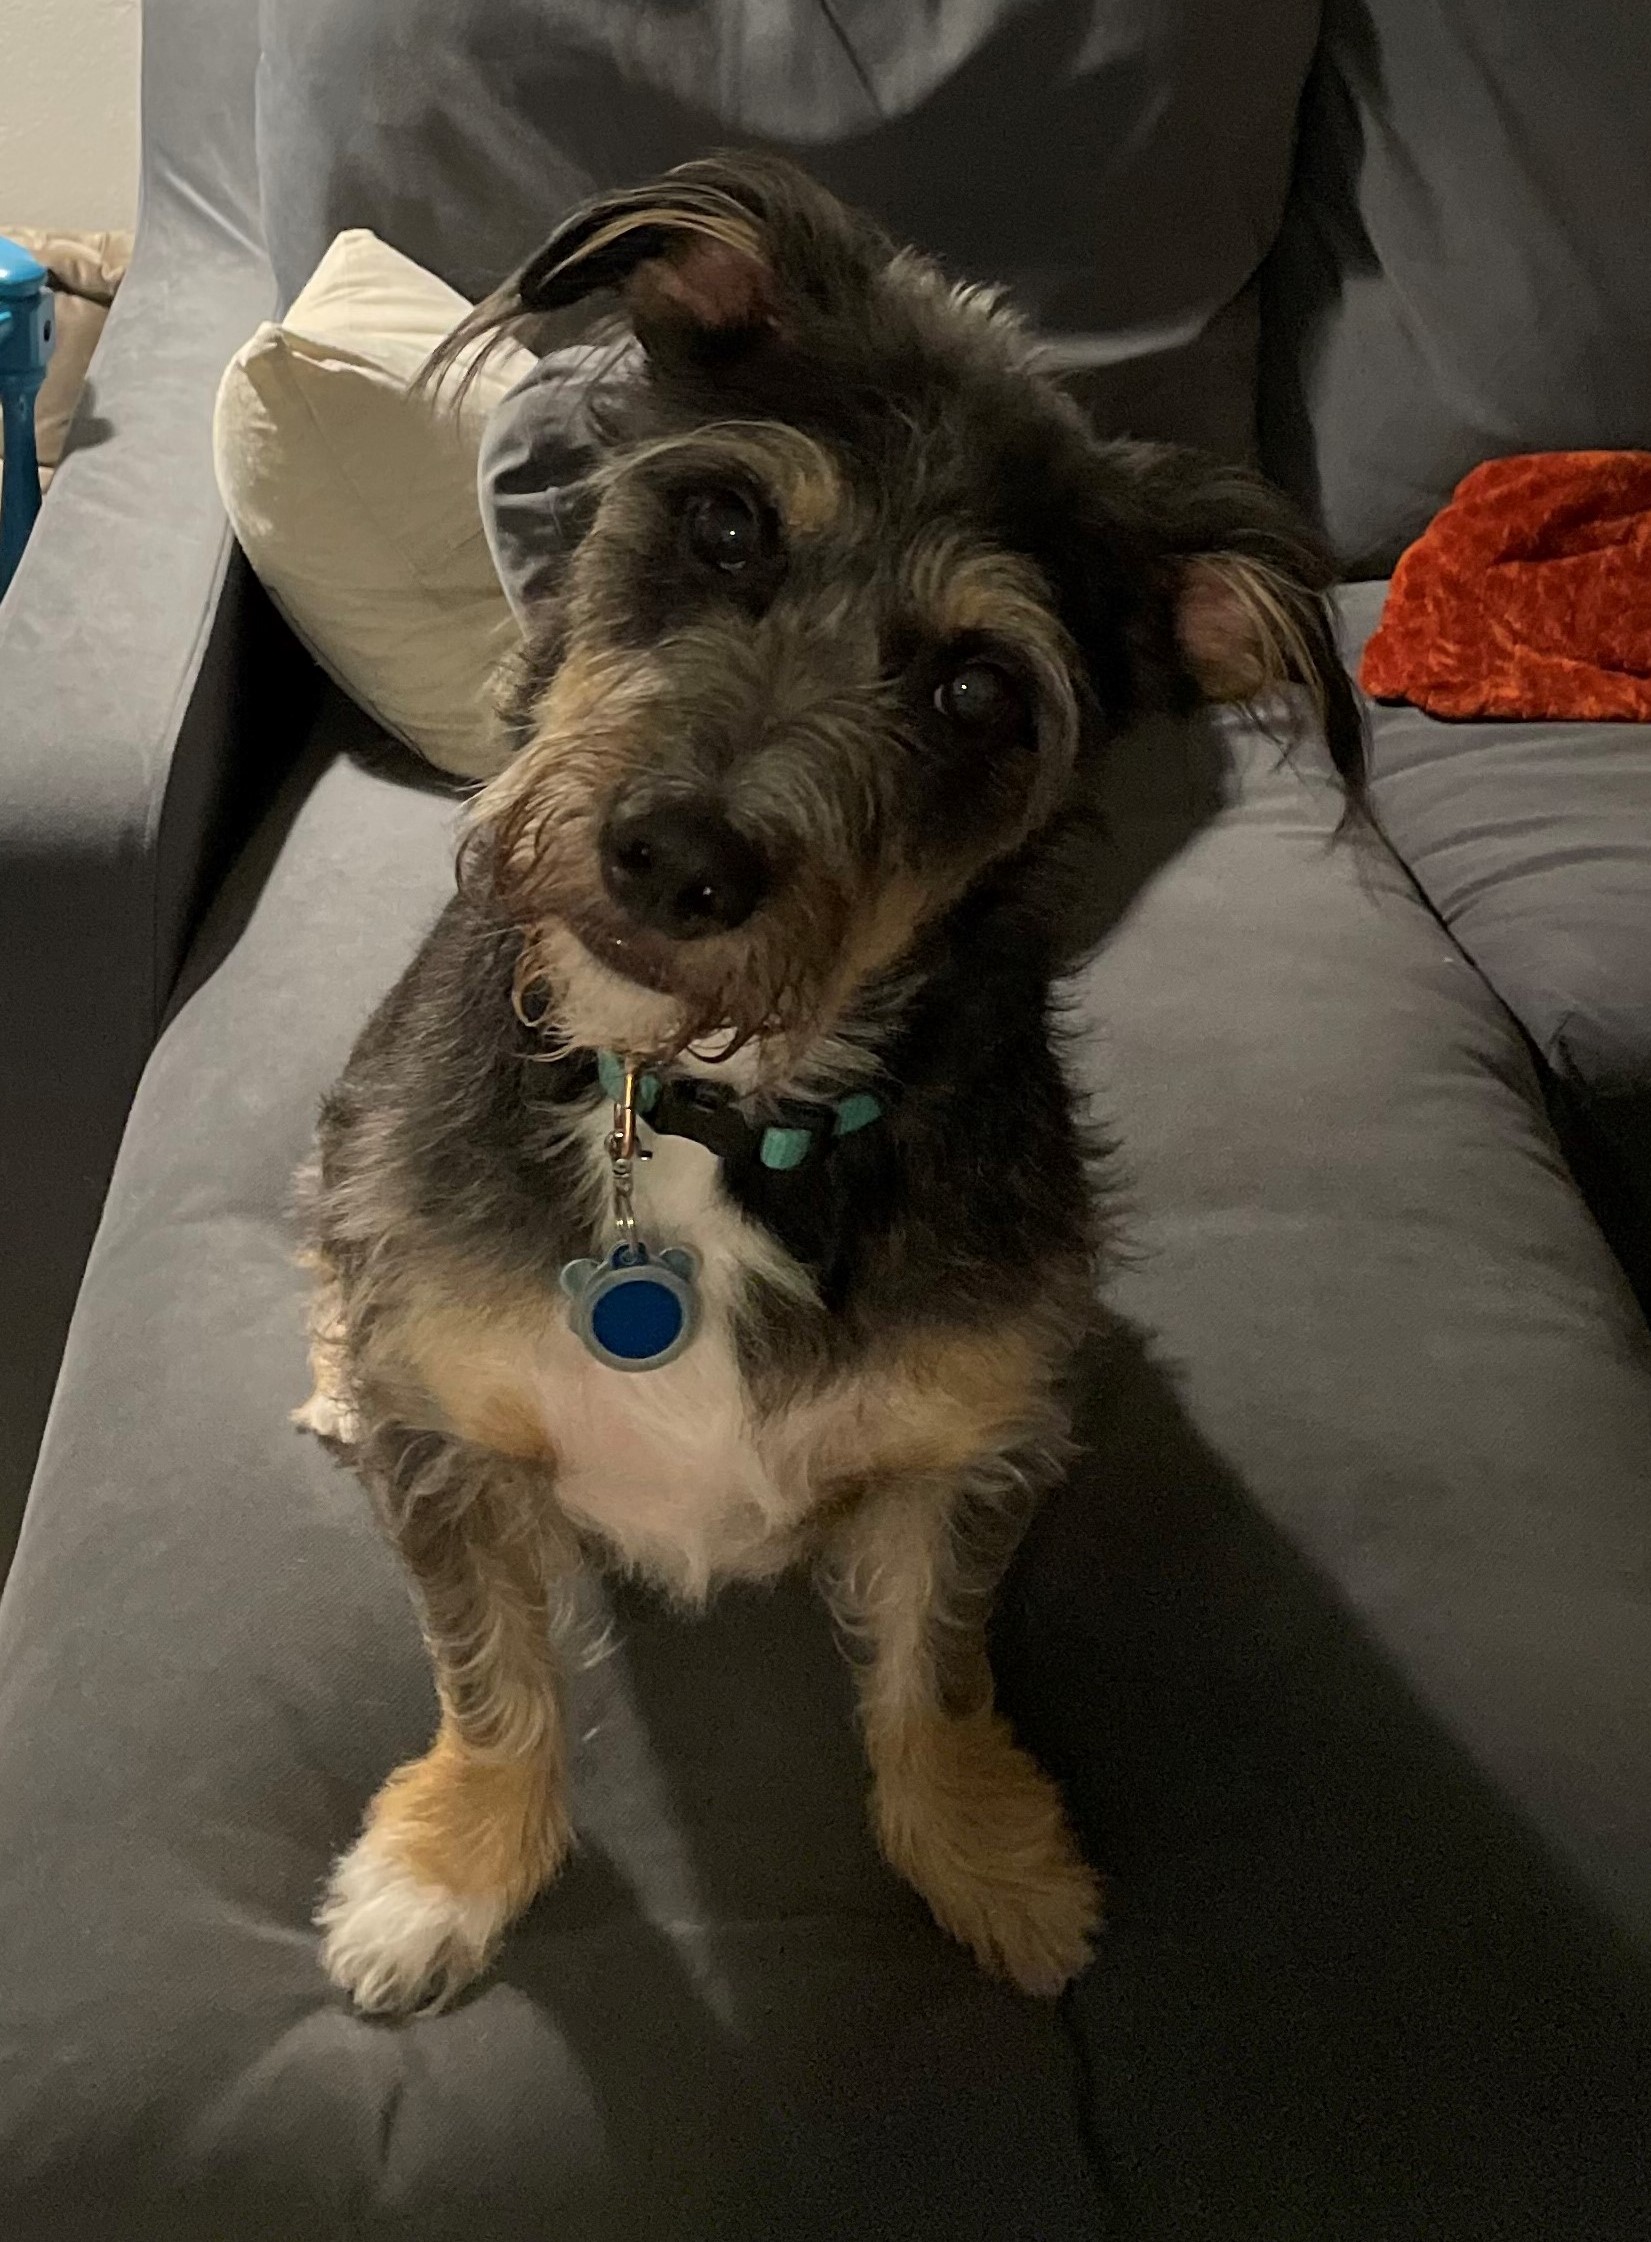 Photo of a fuzzy small dog named Winston. He is standing on a gray sofa, and his wispy tan, gray, and white hair creates little curls around his ears and legs. He has long expressive eyebrows and is tilting his head in curiosity as he looks at the camera.